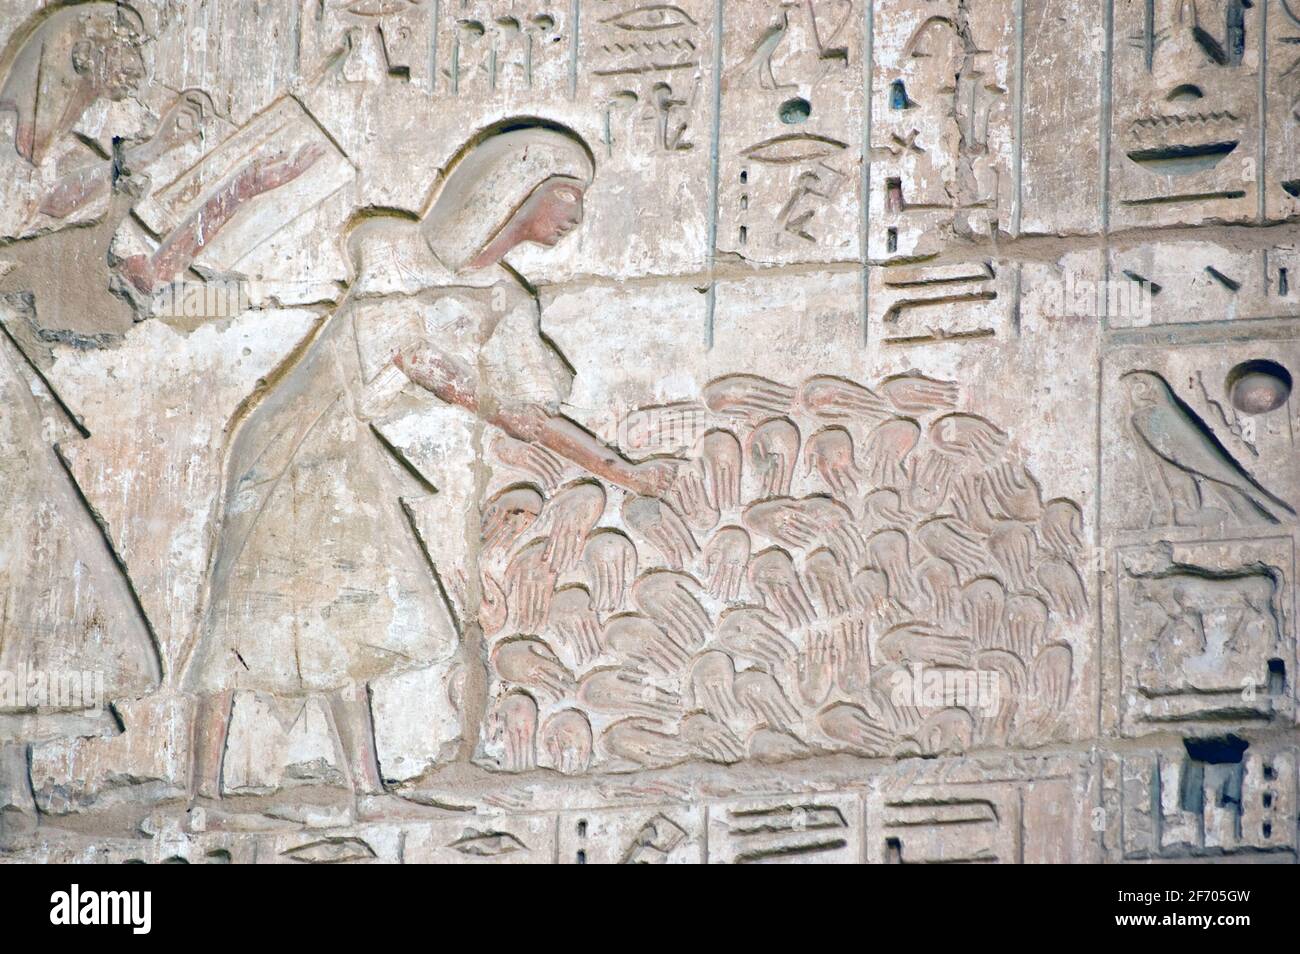 An ancient Egyptian carving showing scribes counting the hands of women killed in battle by the forces of Pharoah Ramses II. Temple of Medinet Habu on Stock Photo